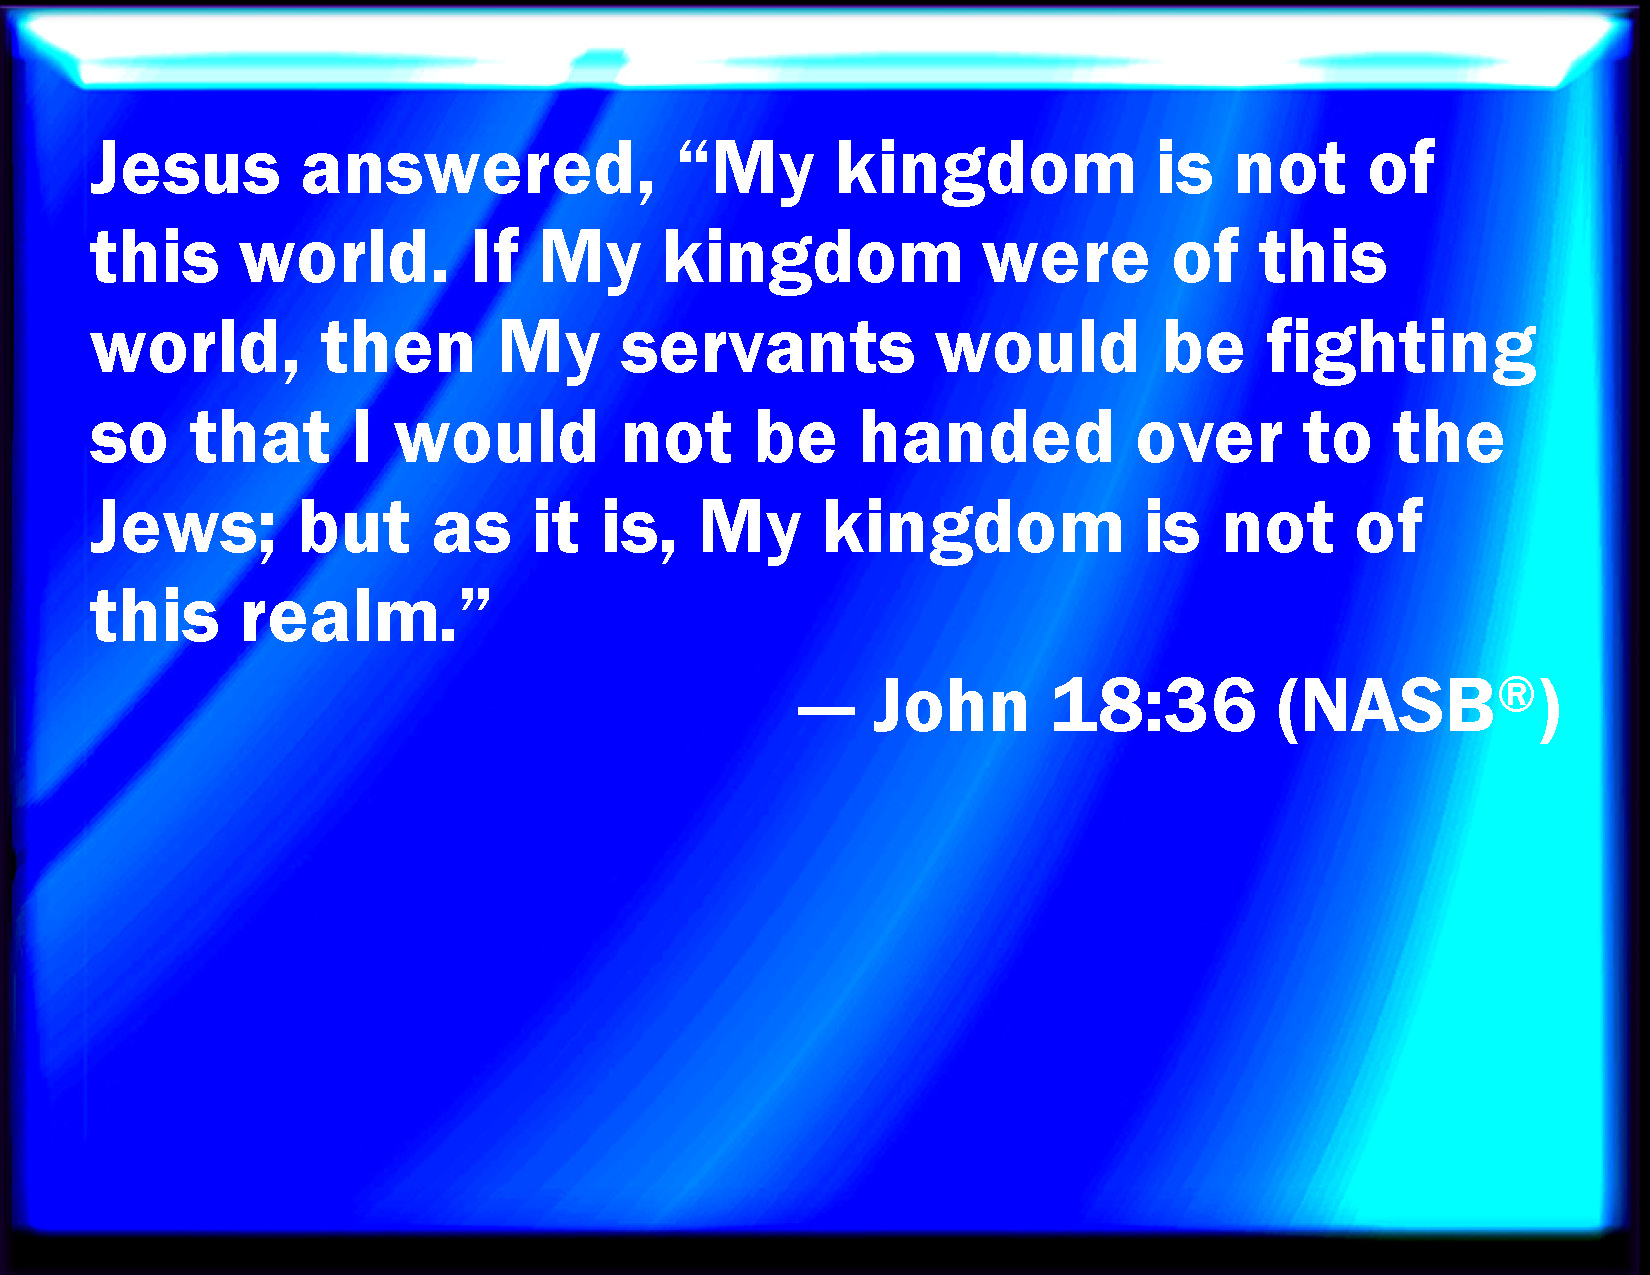 My Kingdom is not of this World Explained - John 18:36 a Deeper Meaning